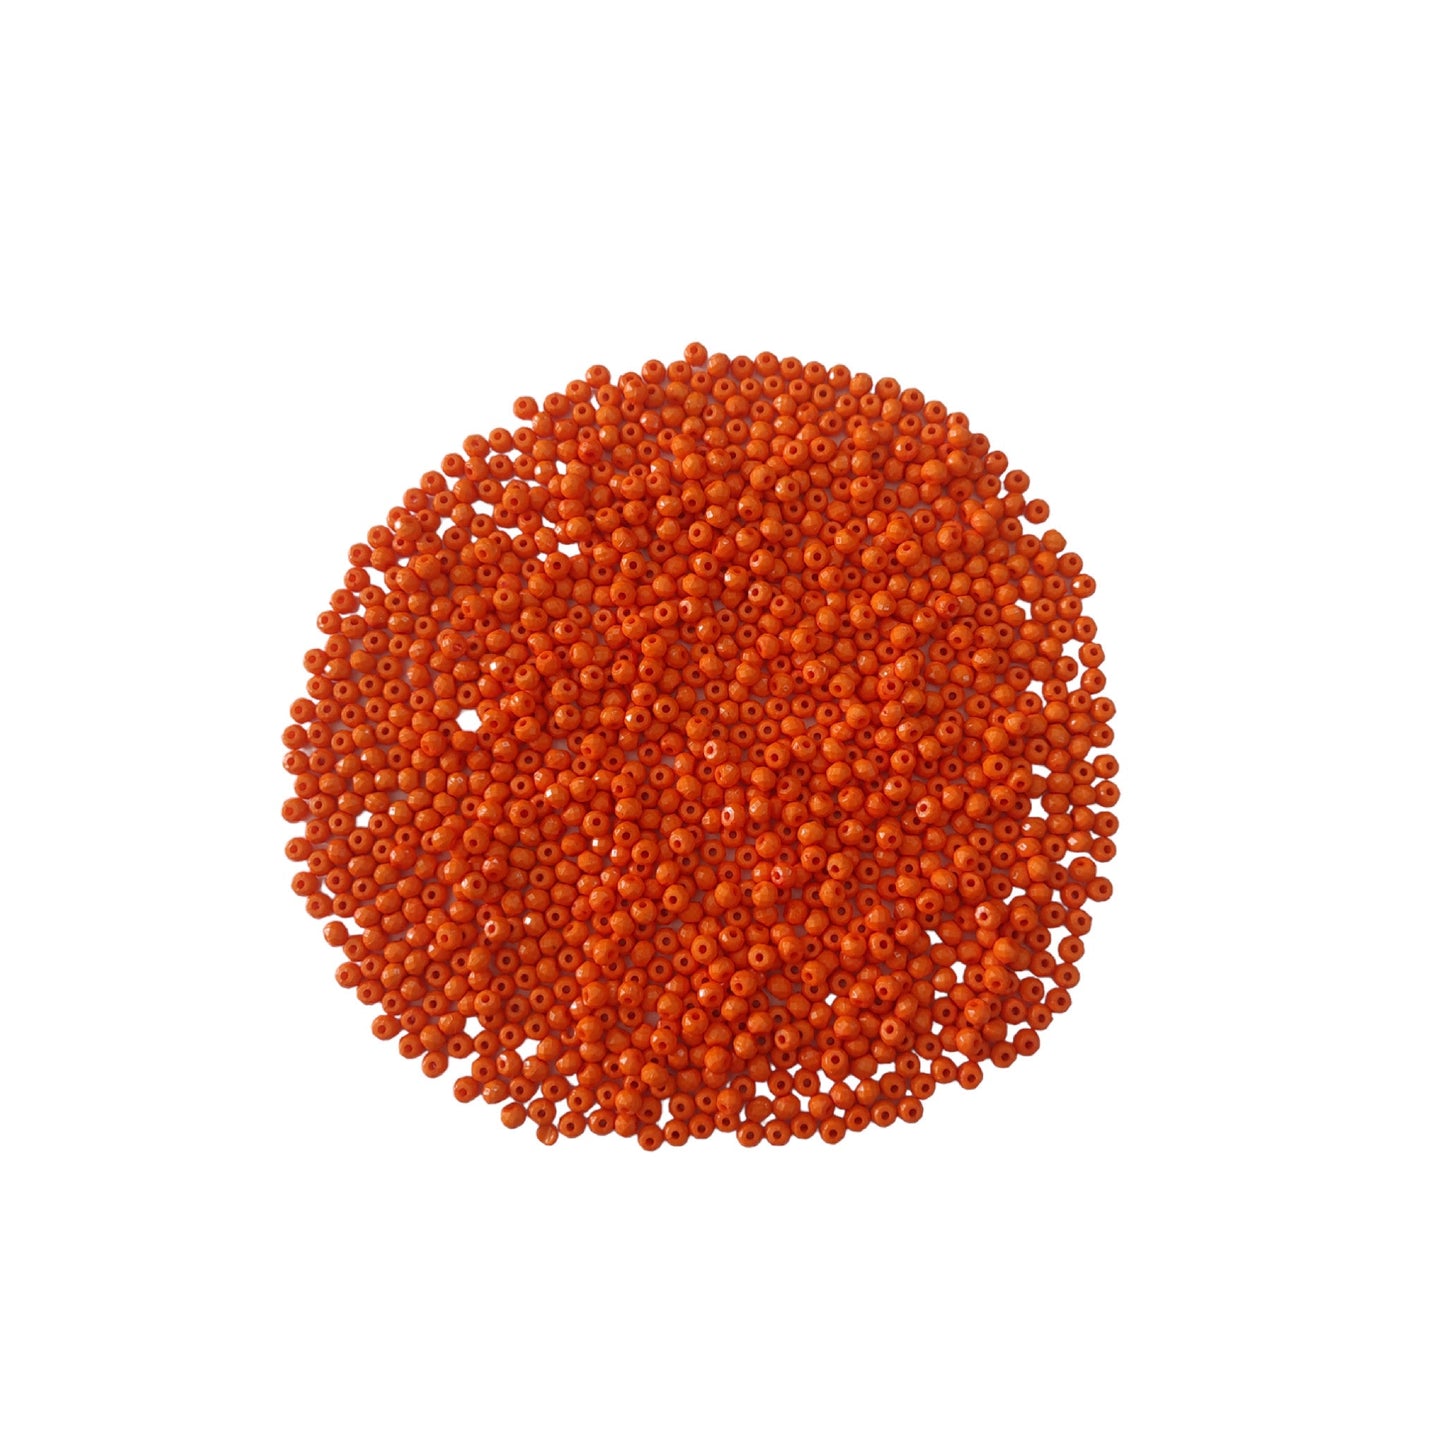 Indian Petals - Tyre shape ABS Colored Beads Ideal for Jewelry designing Craft or Decor Tyre shape ABS Colored Beads Ideal for Jewelry designing Craft or Decor - 8mm / Orange Red / 100 Grams